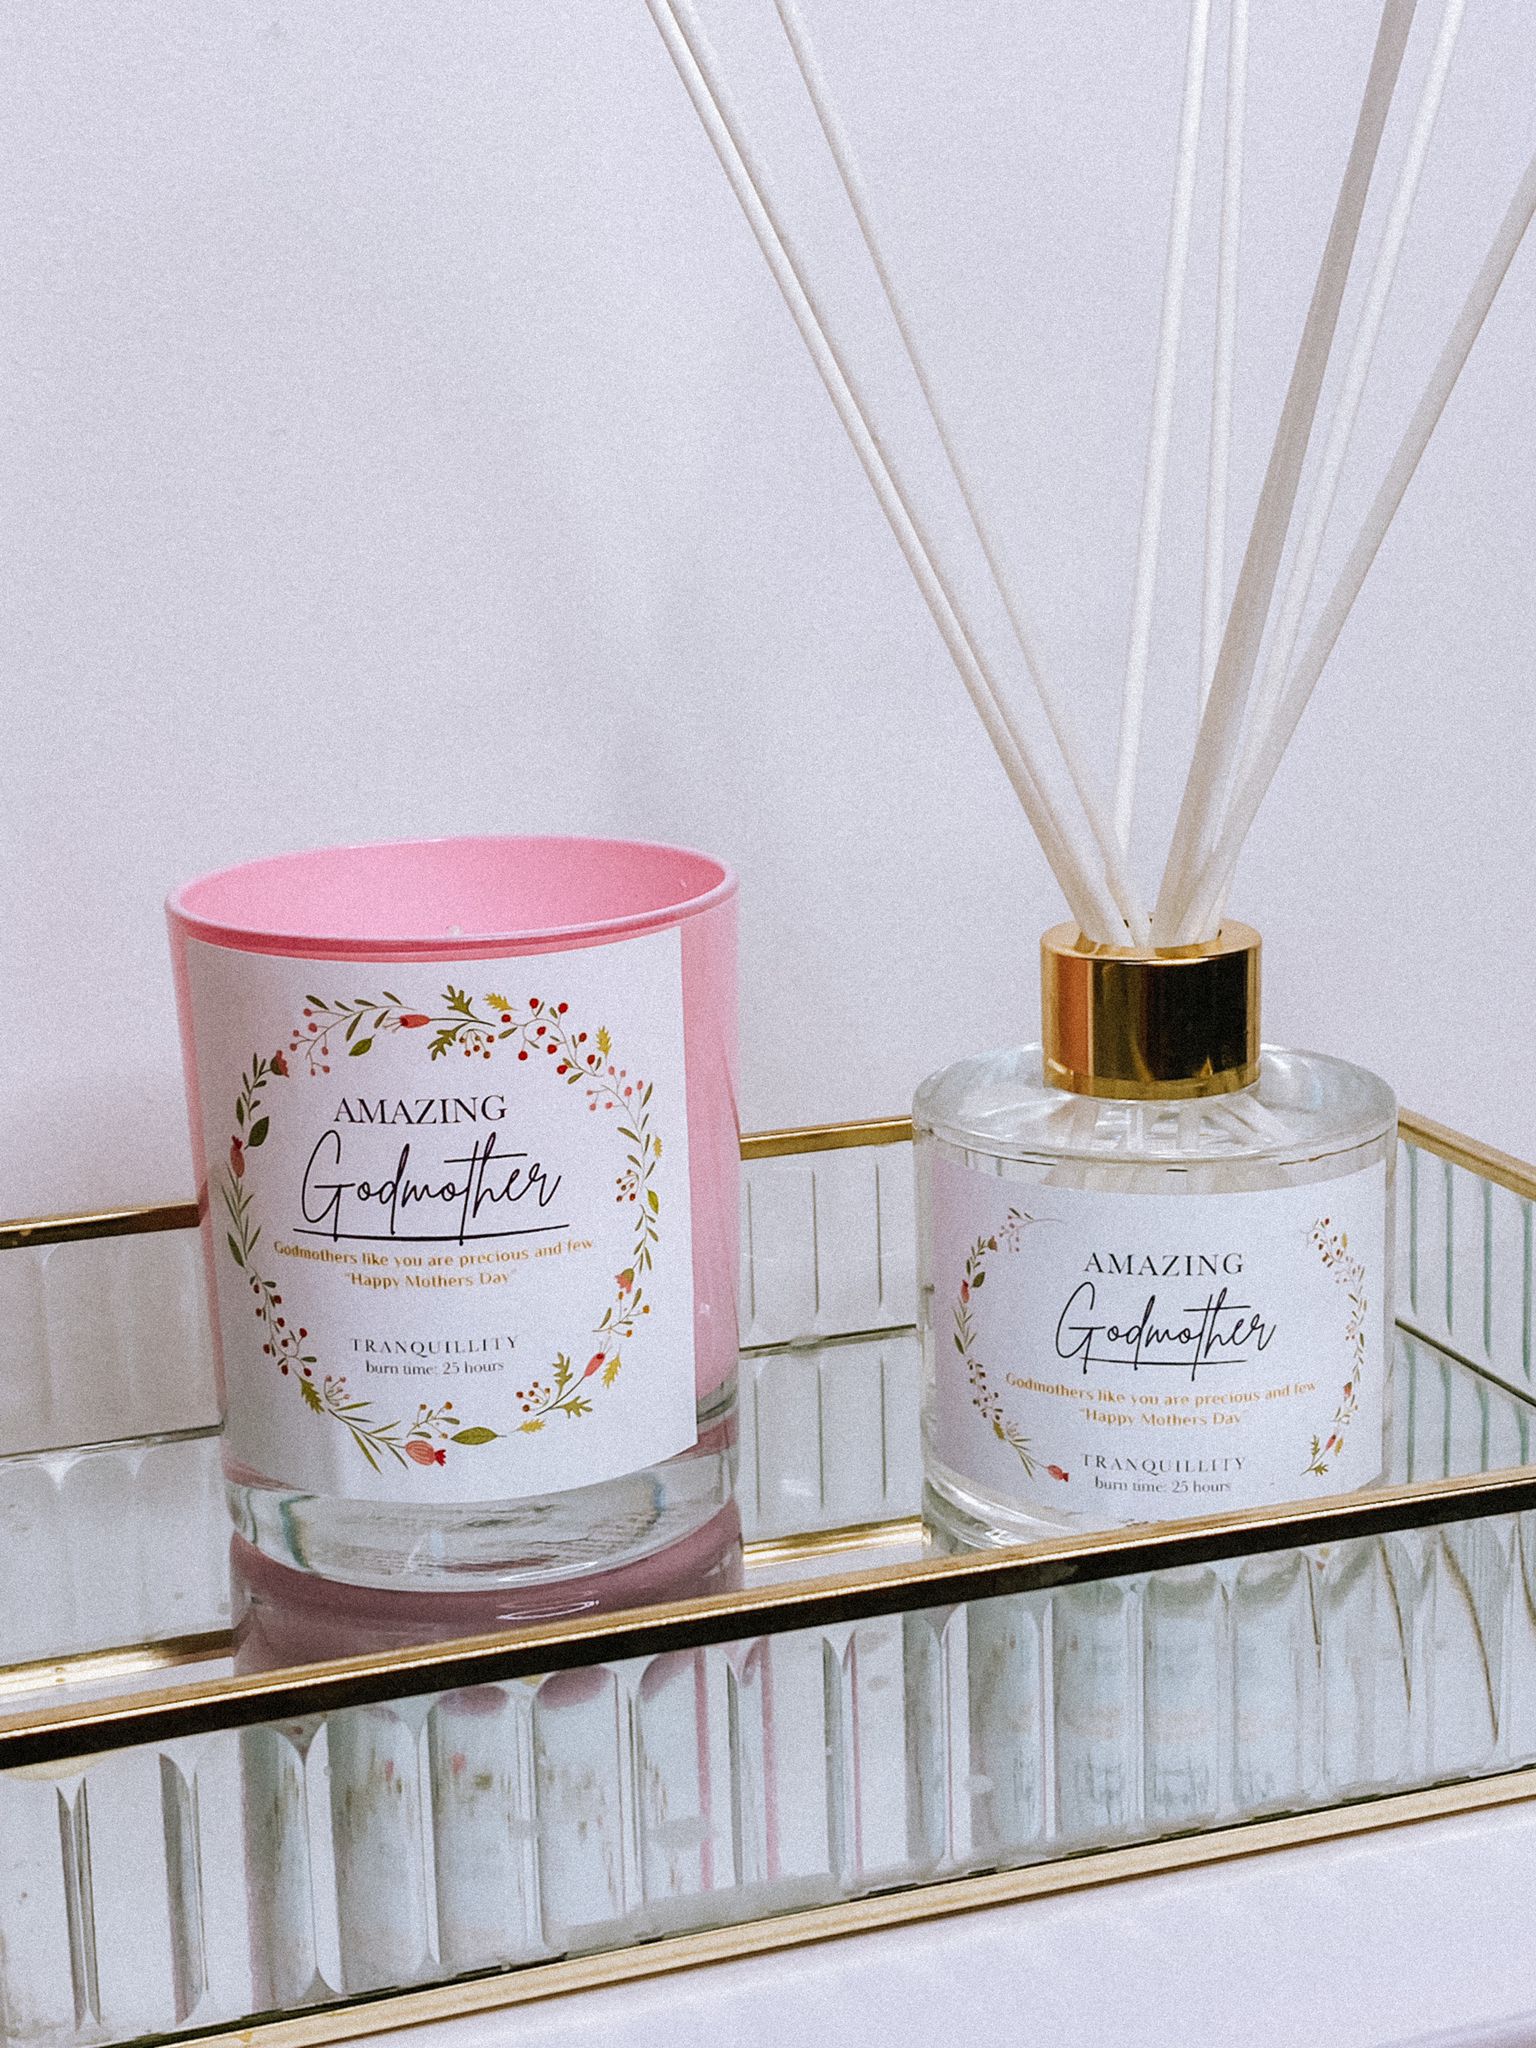 "Amazing Godmother" Reed Diffuser